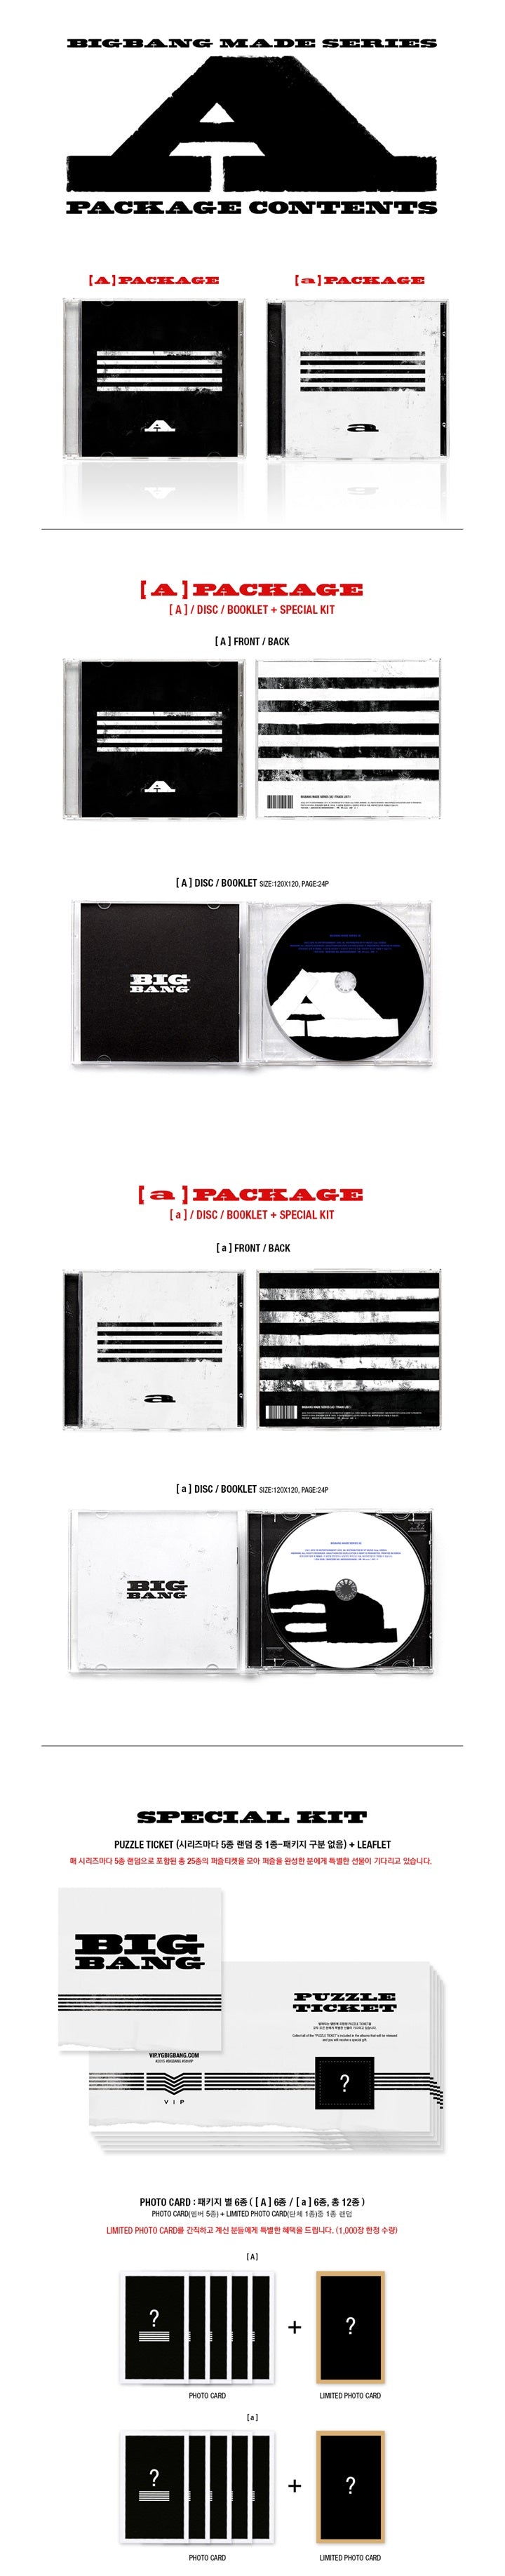 1 CD
1 Booklet
1 Photocard
1 Puzzleticket A Or a Version